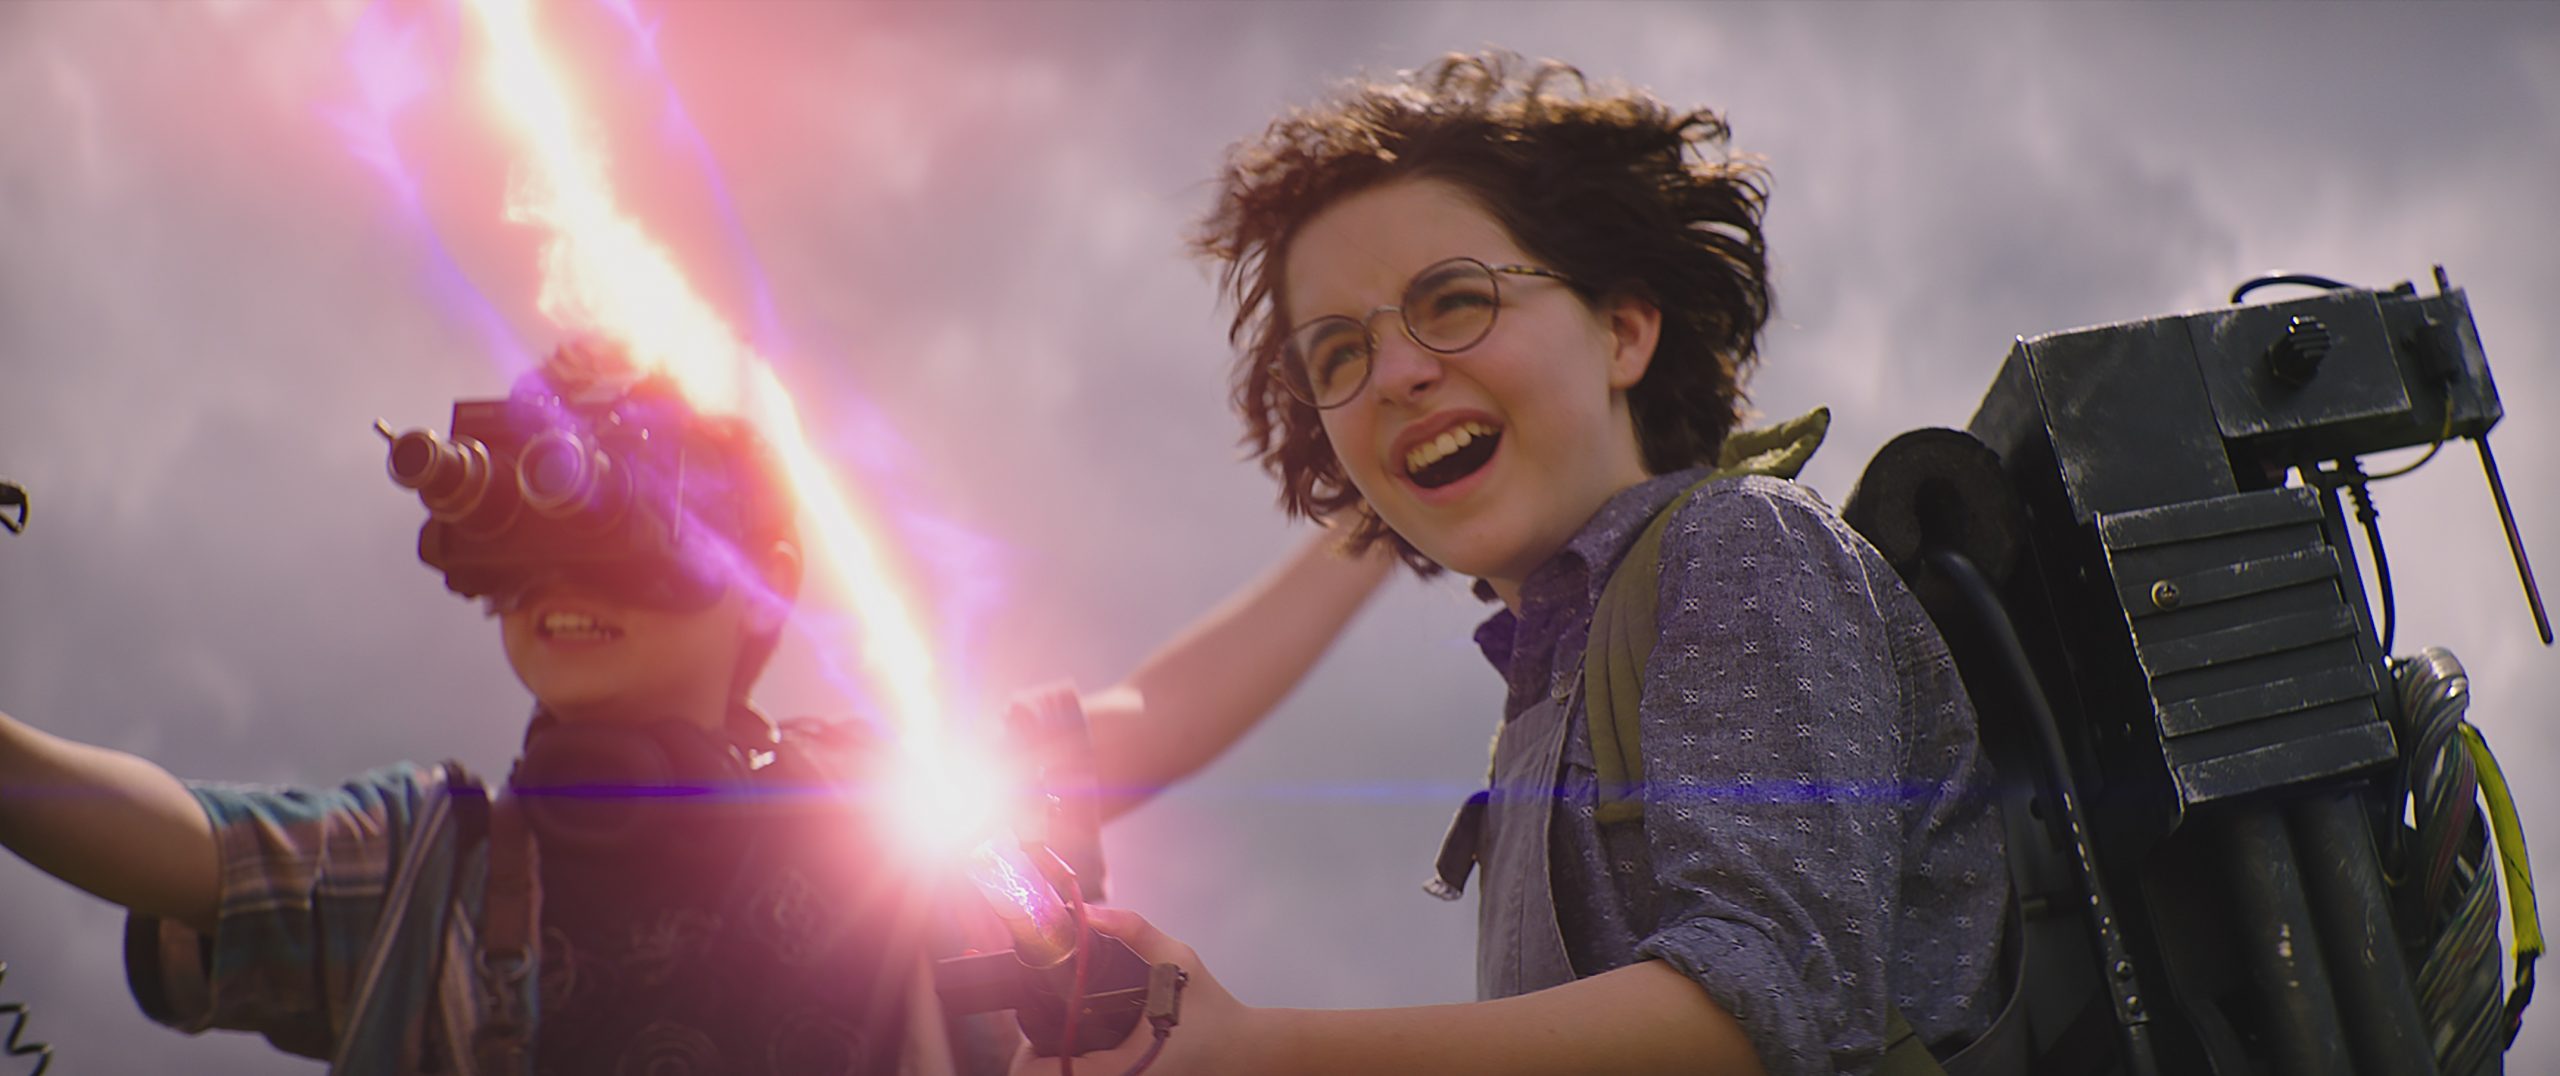 Phoebe (MCKENNA GRACE, r.) und Podcast (LOGAN KIM, l.) in Sony Pictures’ GHOSTBUSTERS: LEGACY